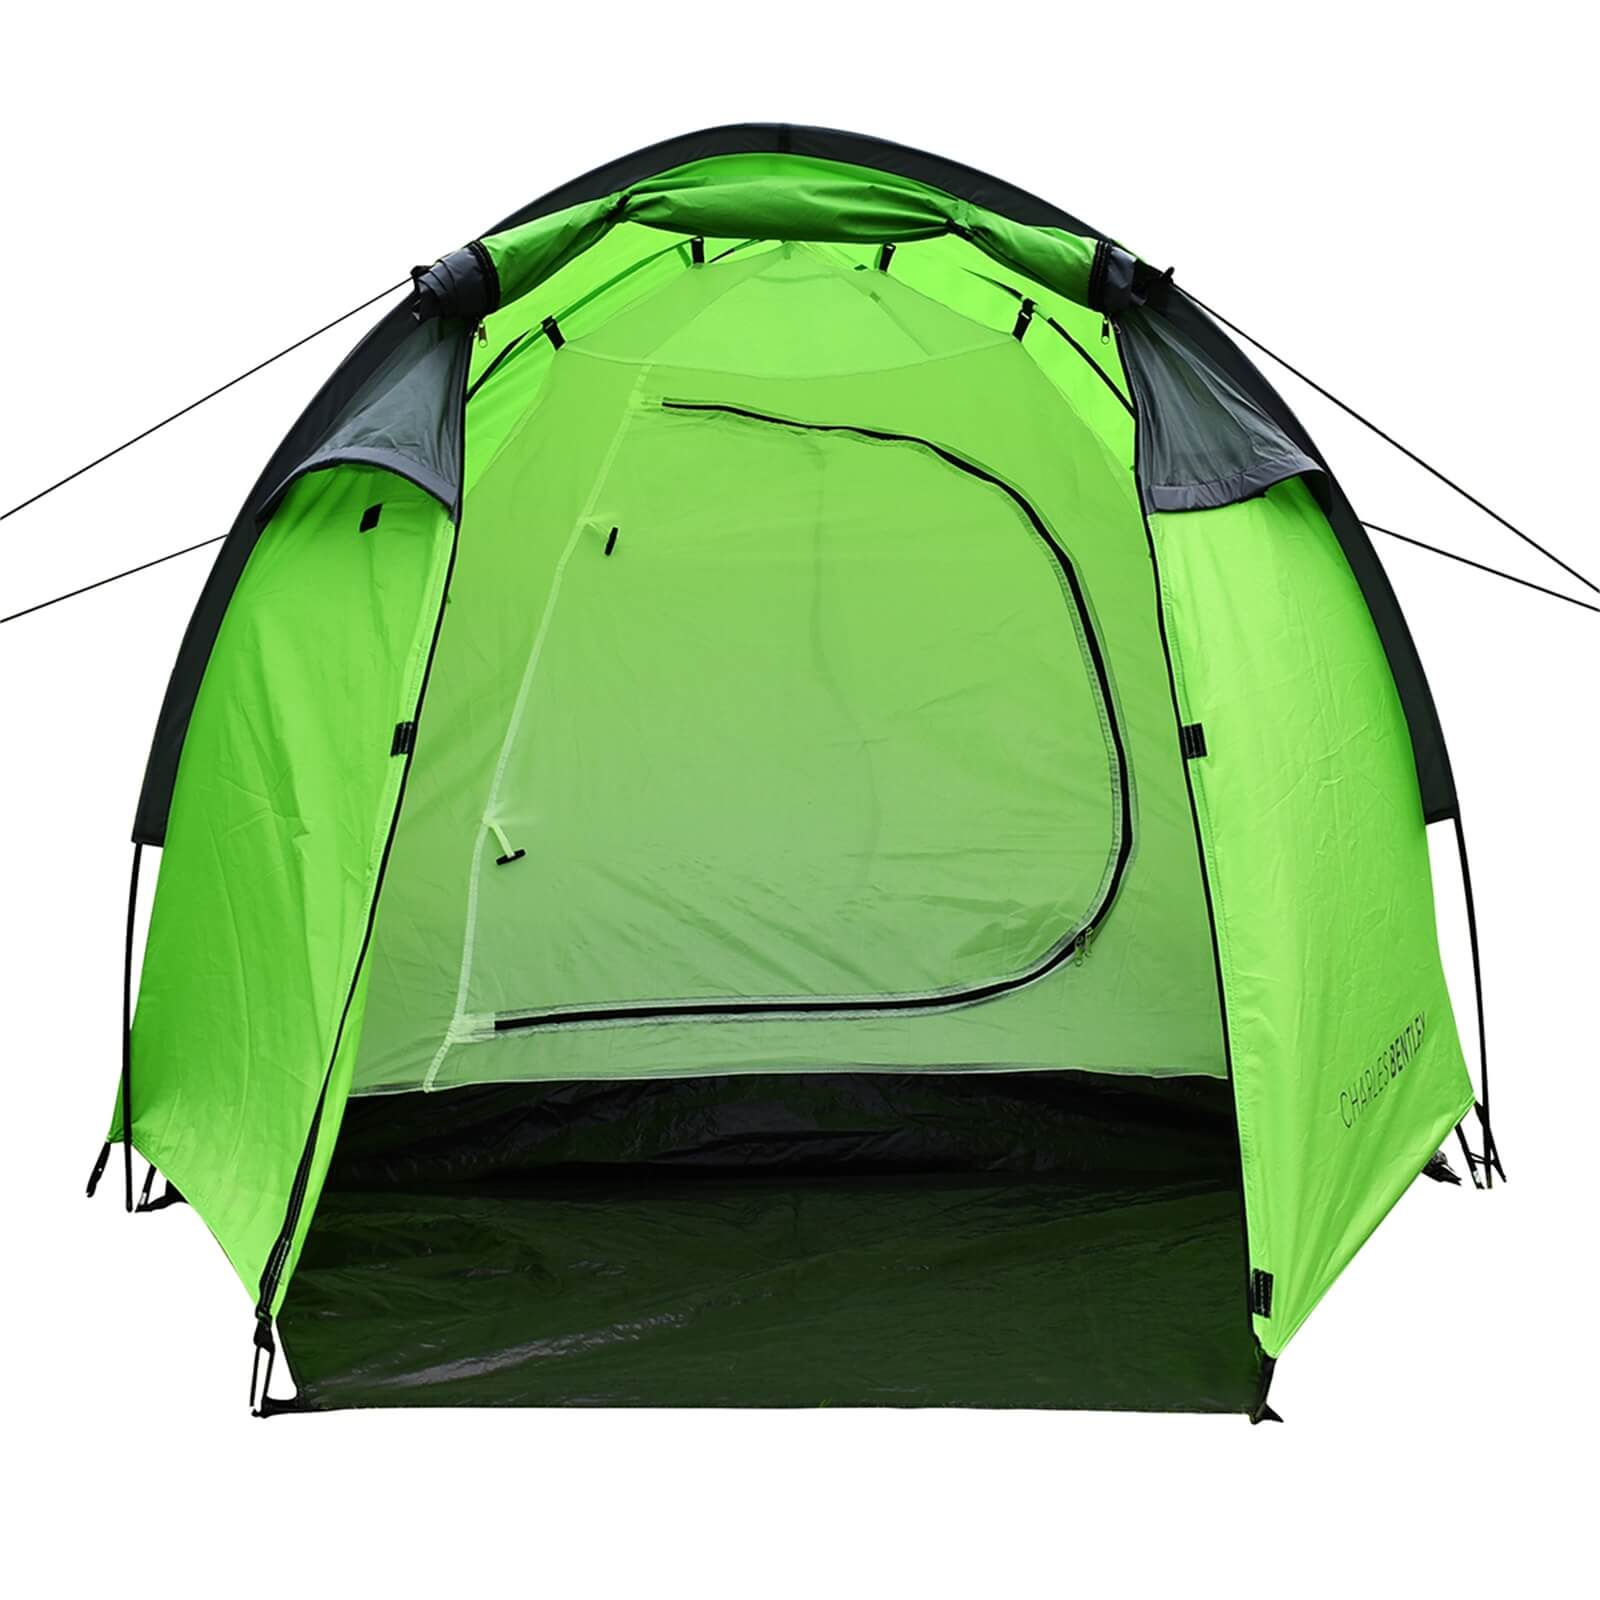 Charles Bentley 2 Person Camping Tent With Awning - Green